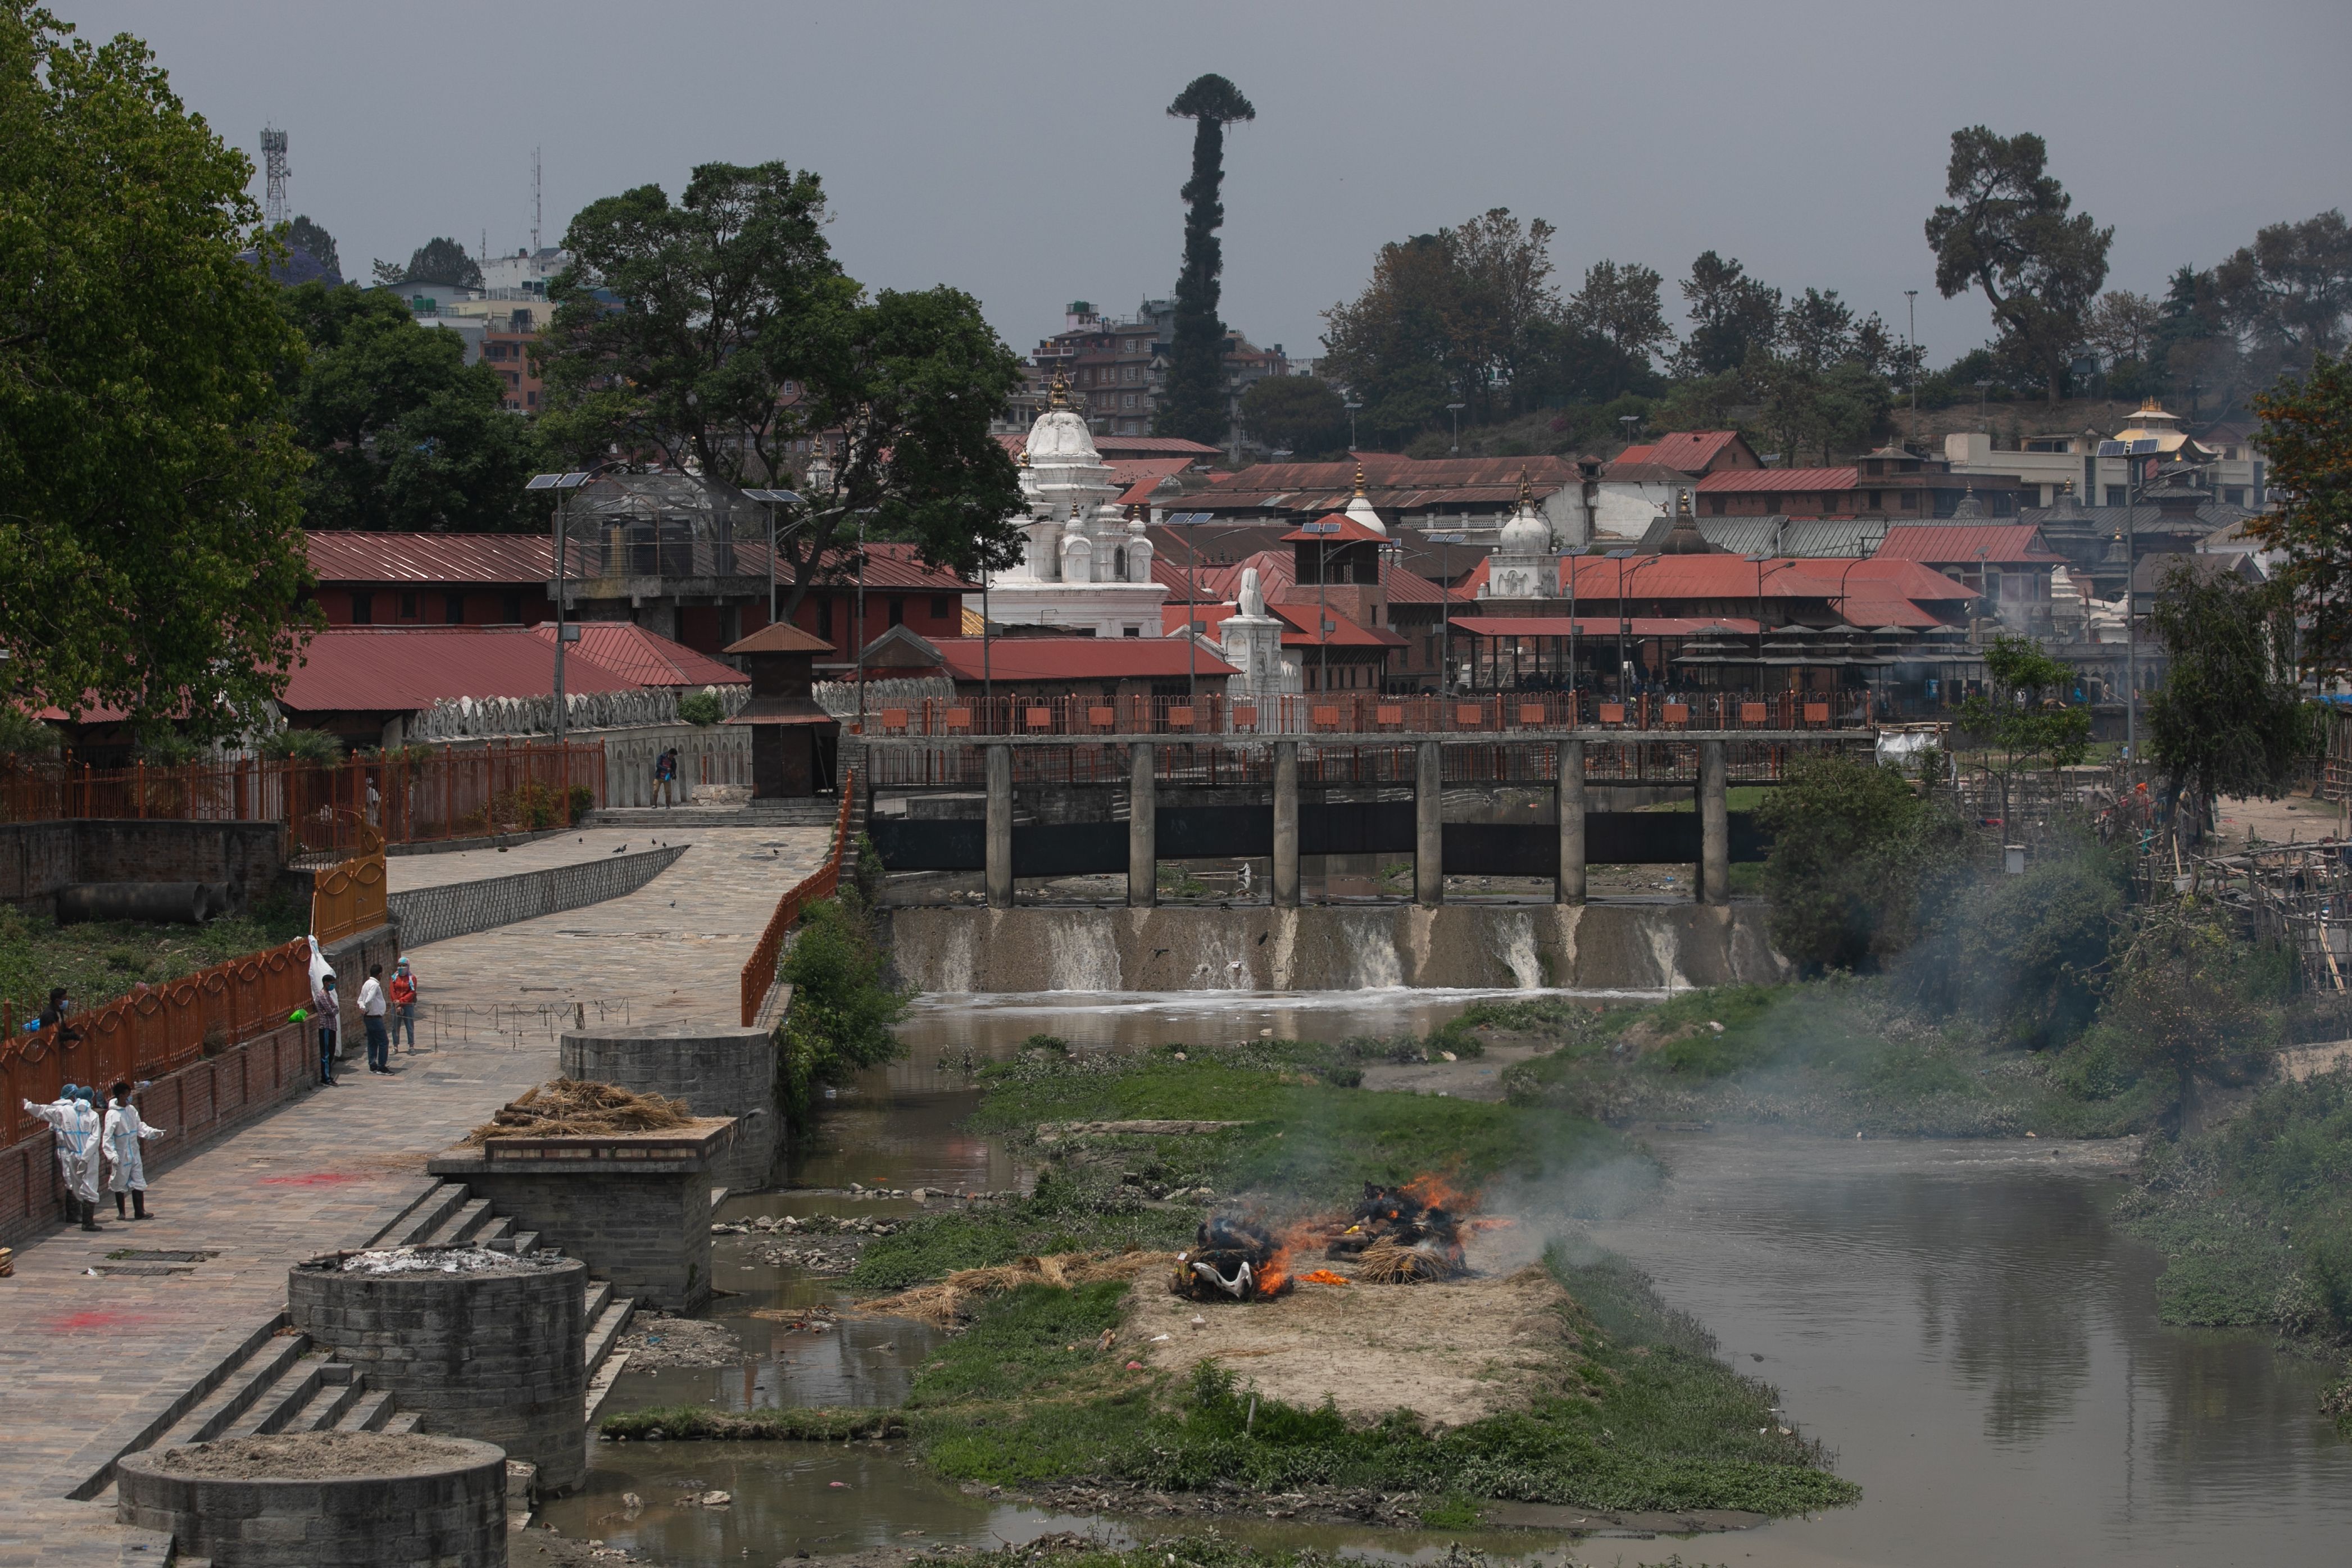 Nepalese workers wearing protective suits stand near the burning dead bodies of Coronavirus (COVID-19) victims during a cremation at the premises of Pashupatinath temple in Kathmandu. 